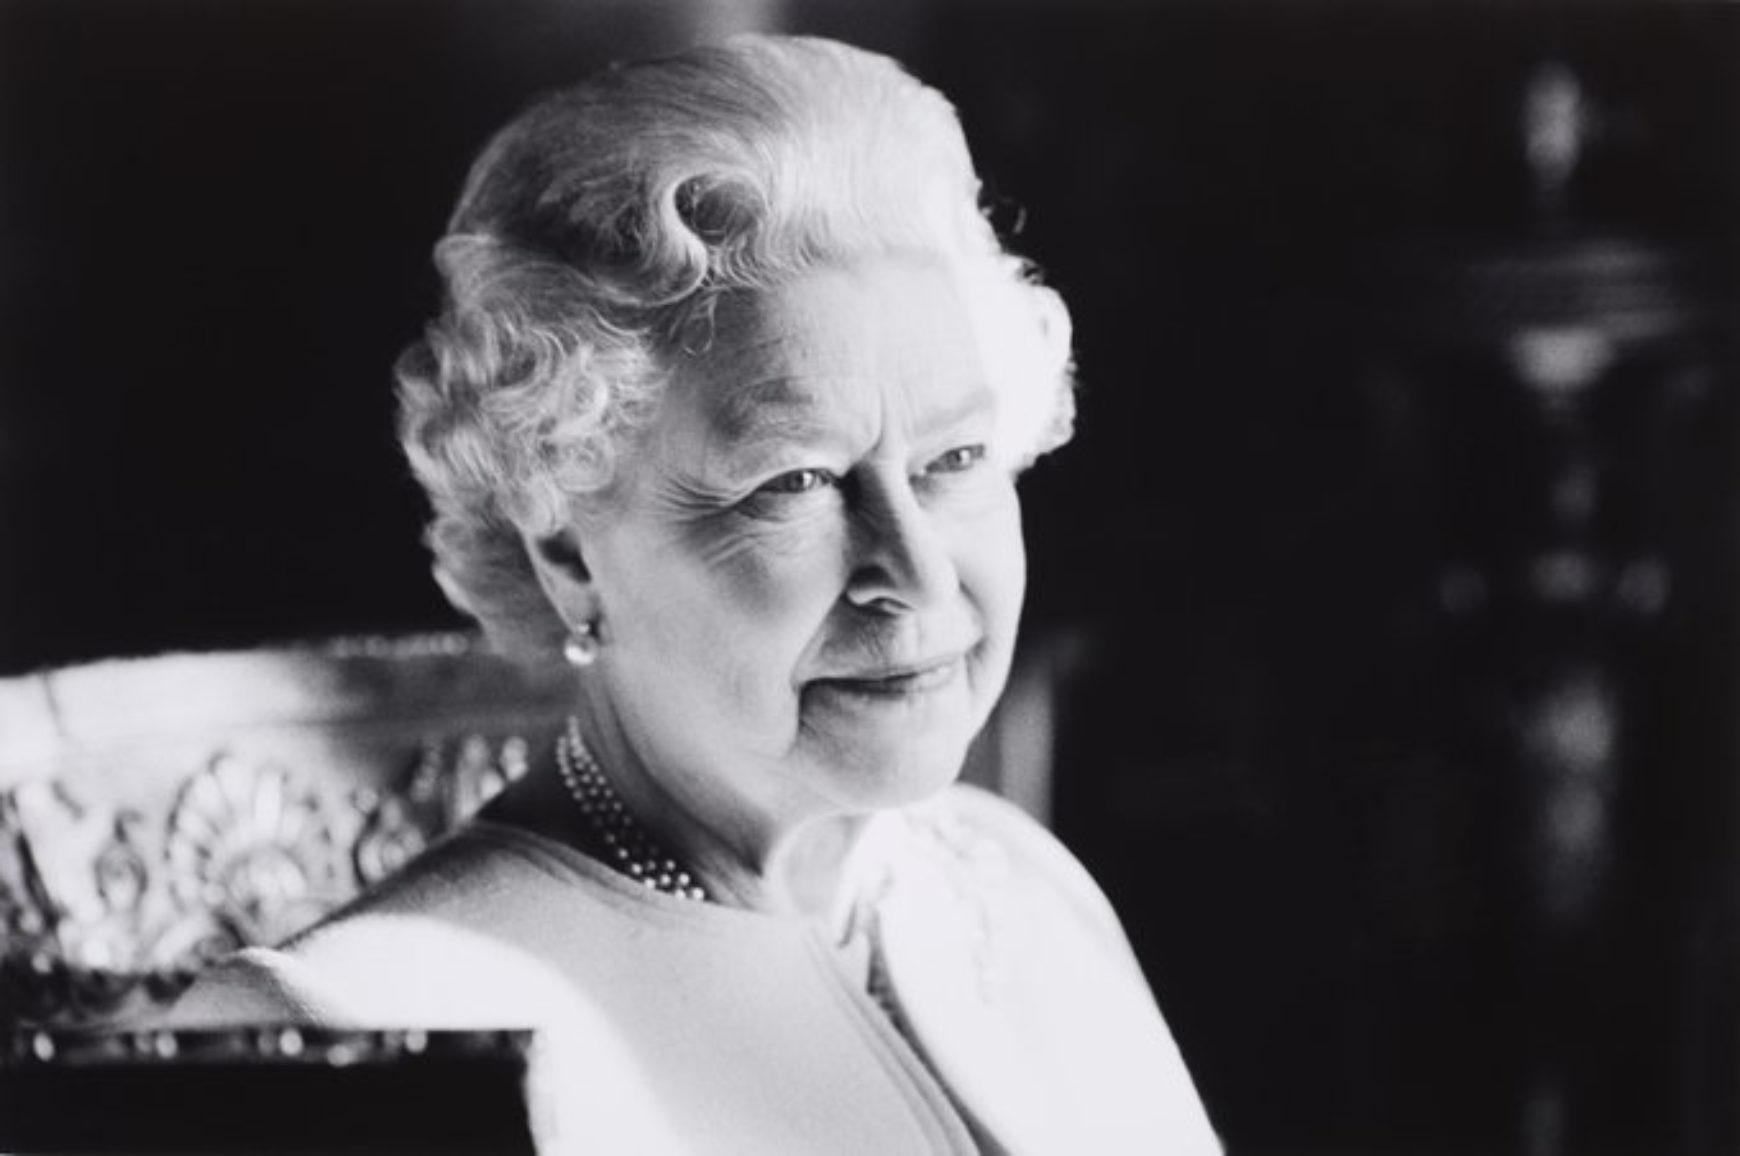 Armitage International offers its deepest condolences to the Royal Family